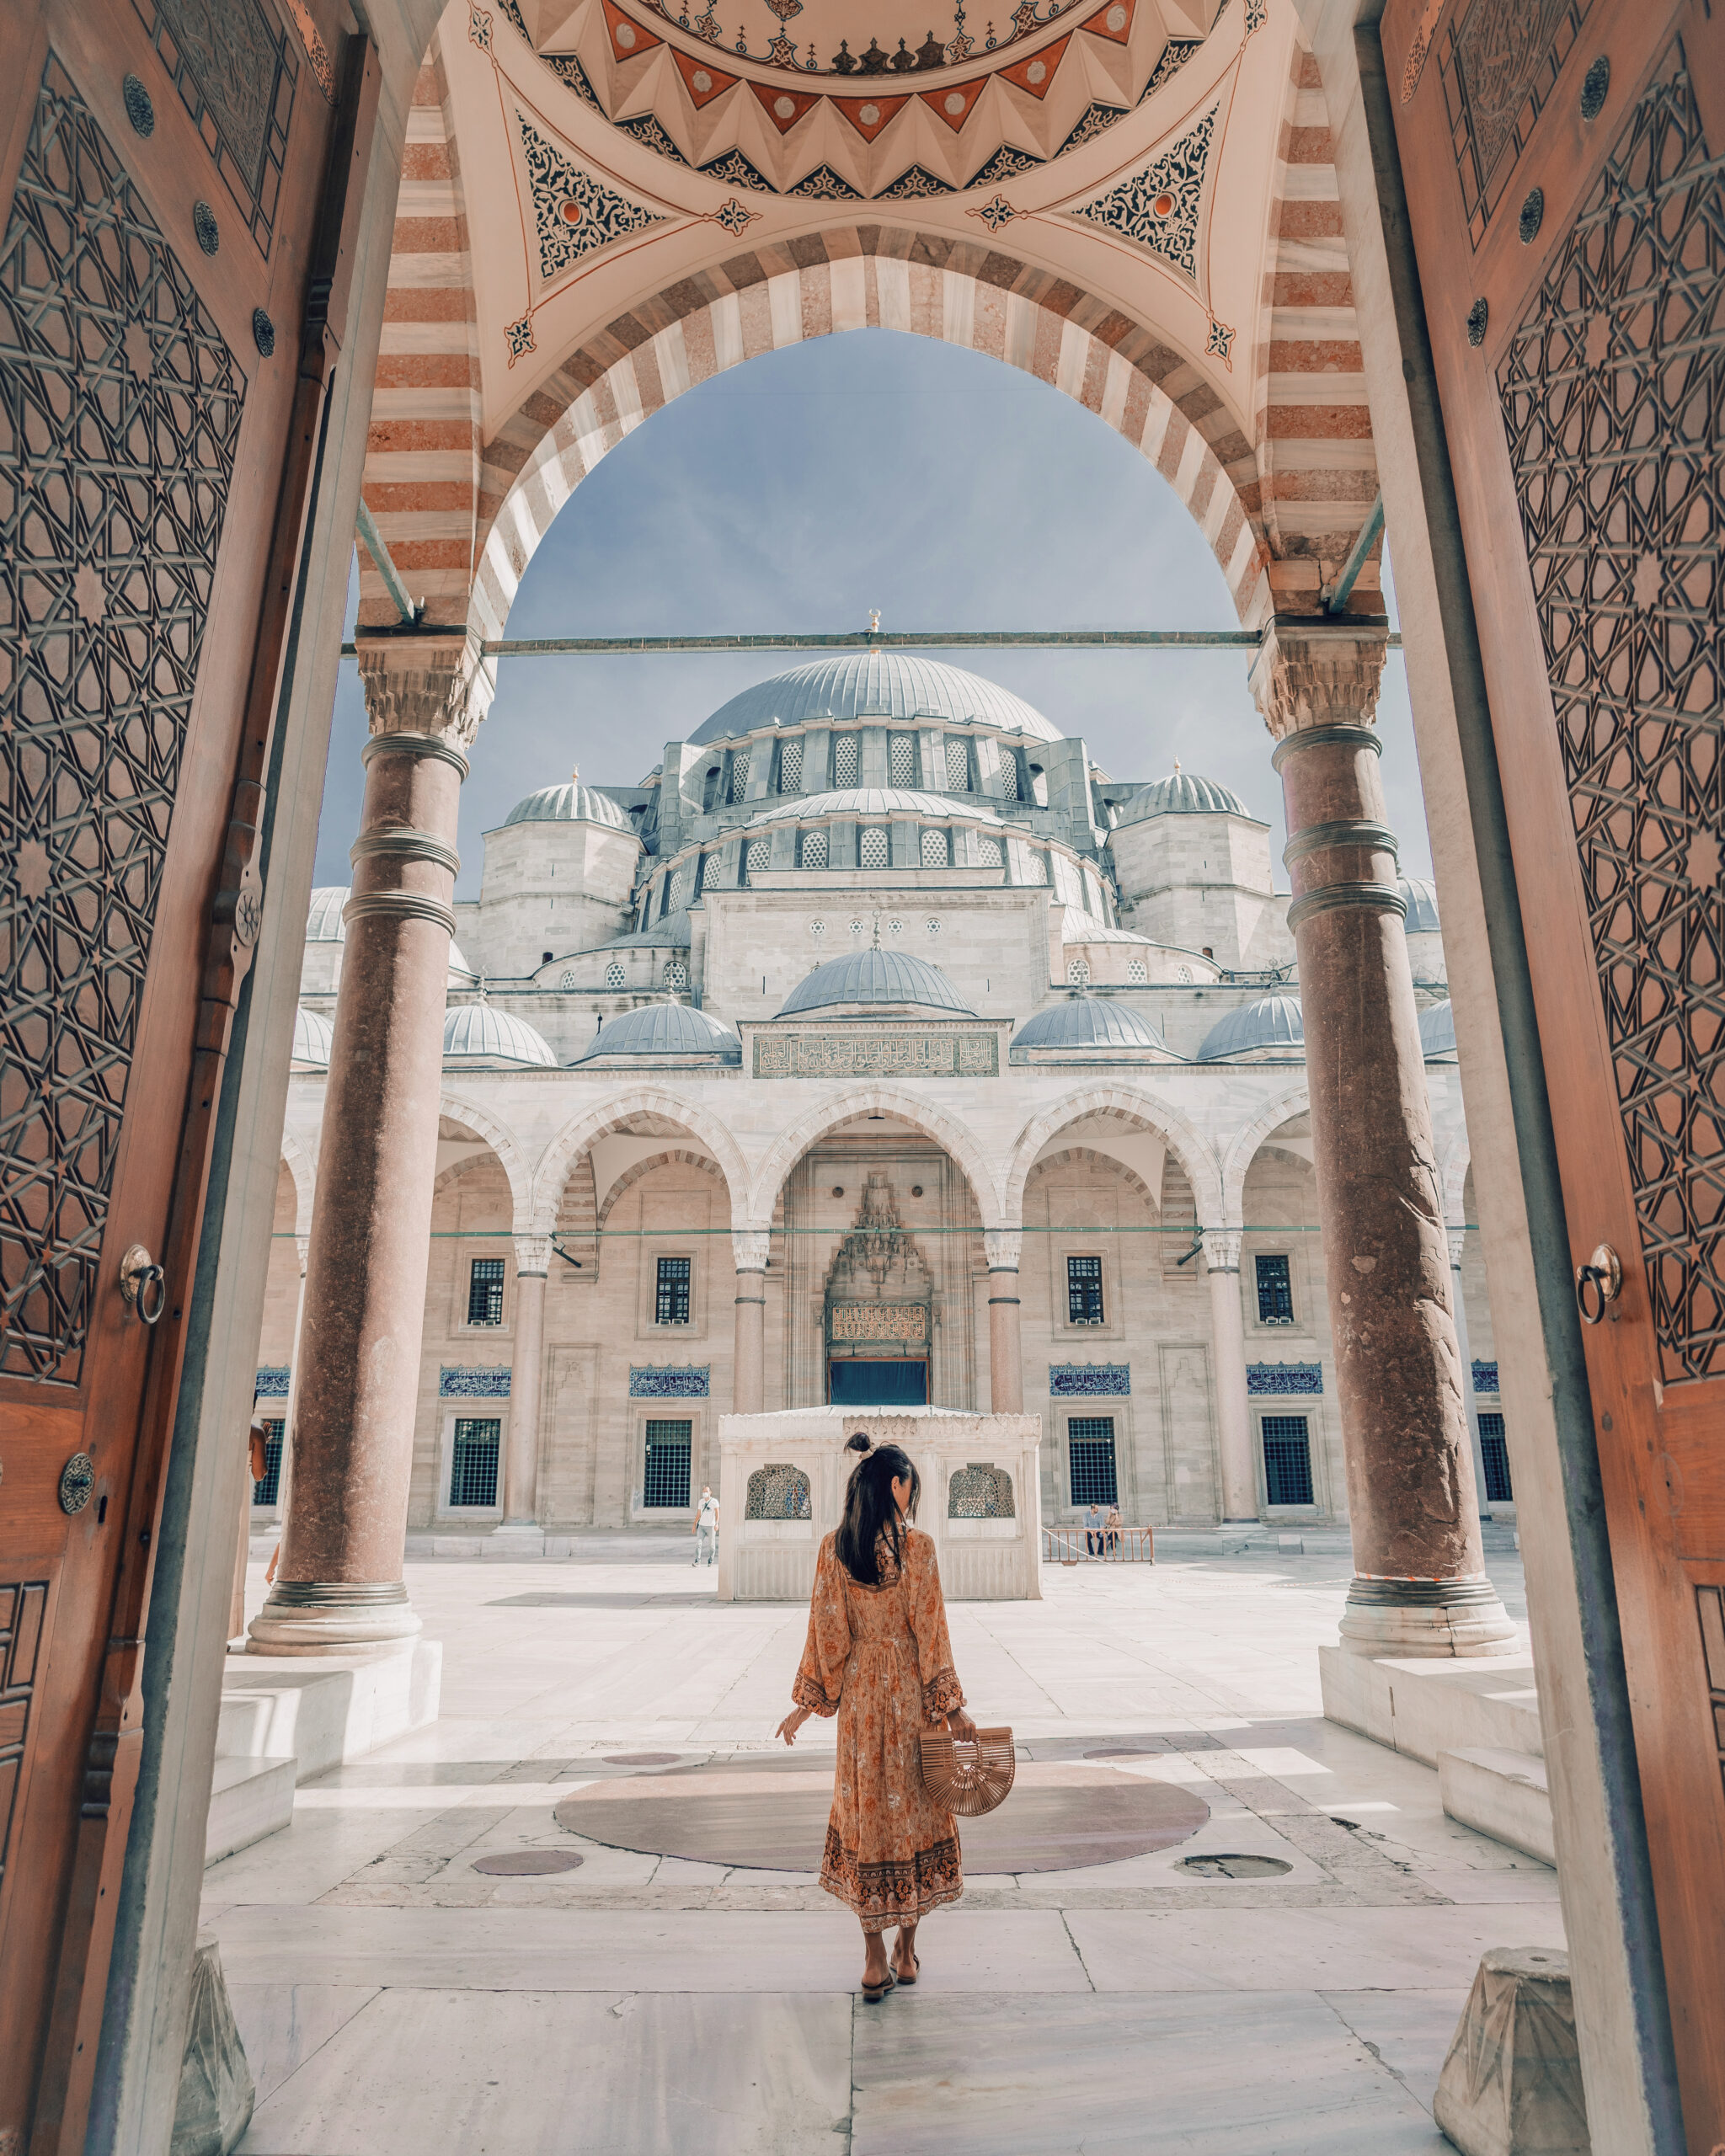 The ultimate guide to Istanbul for first-time visitors that includes the best sights, neighborhoods, rooftops, hotels, restaurants and more.